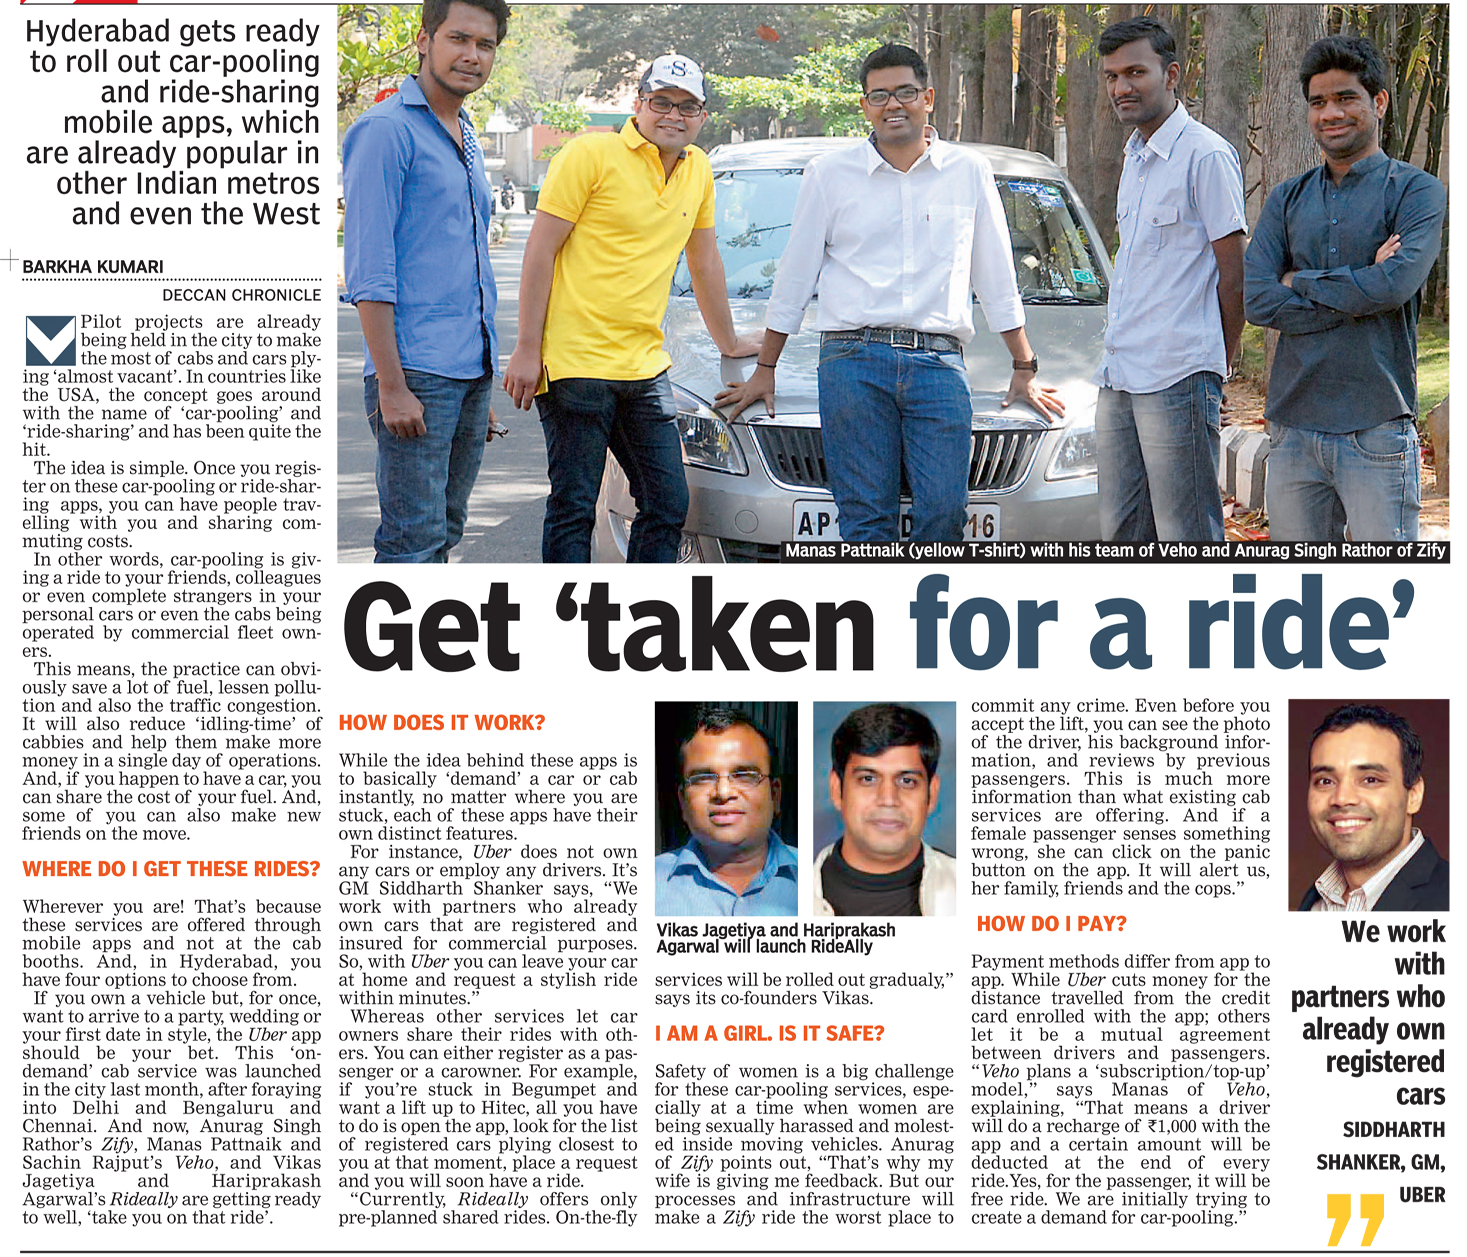 //www.rideally.com/static/images/Deccan_Chronicle_RideAlly_20140211.png